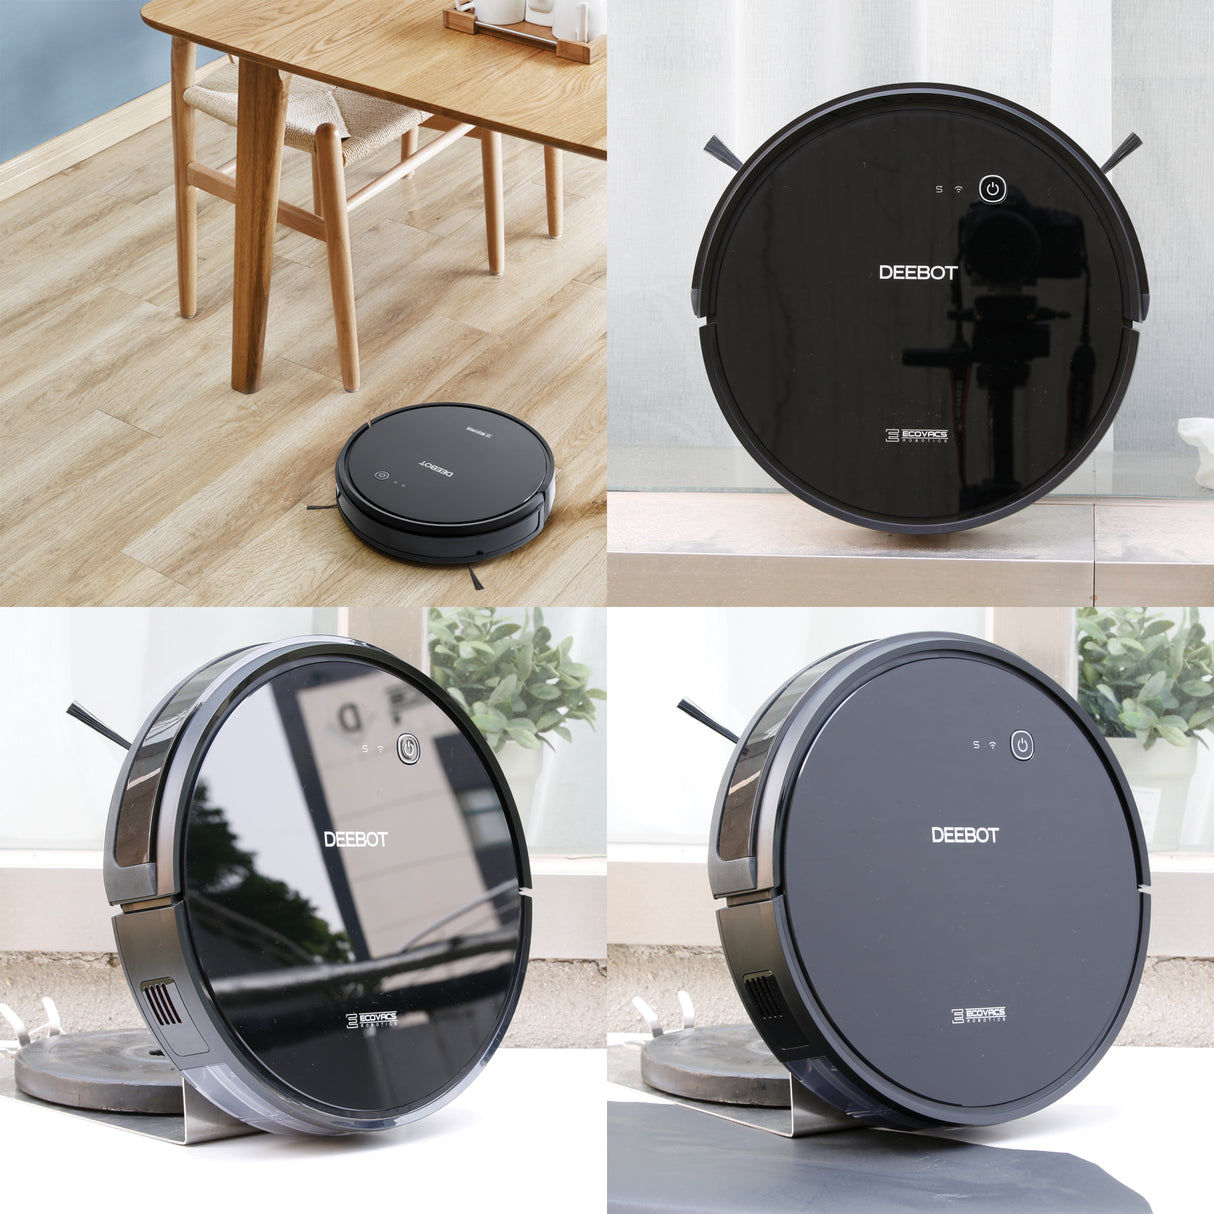 Deebot 601 Robot Vacuum Cleaner - Motion Navigation, 110min Runtime - UNBOXED DEAL